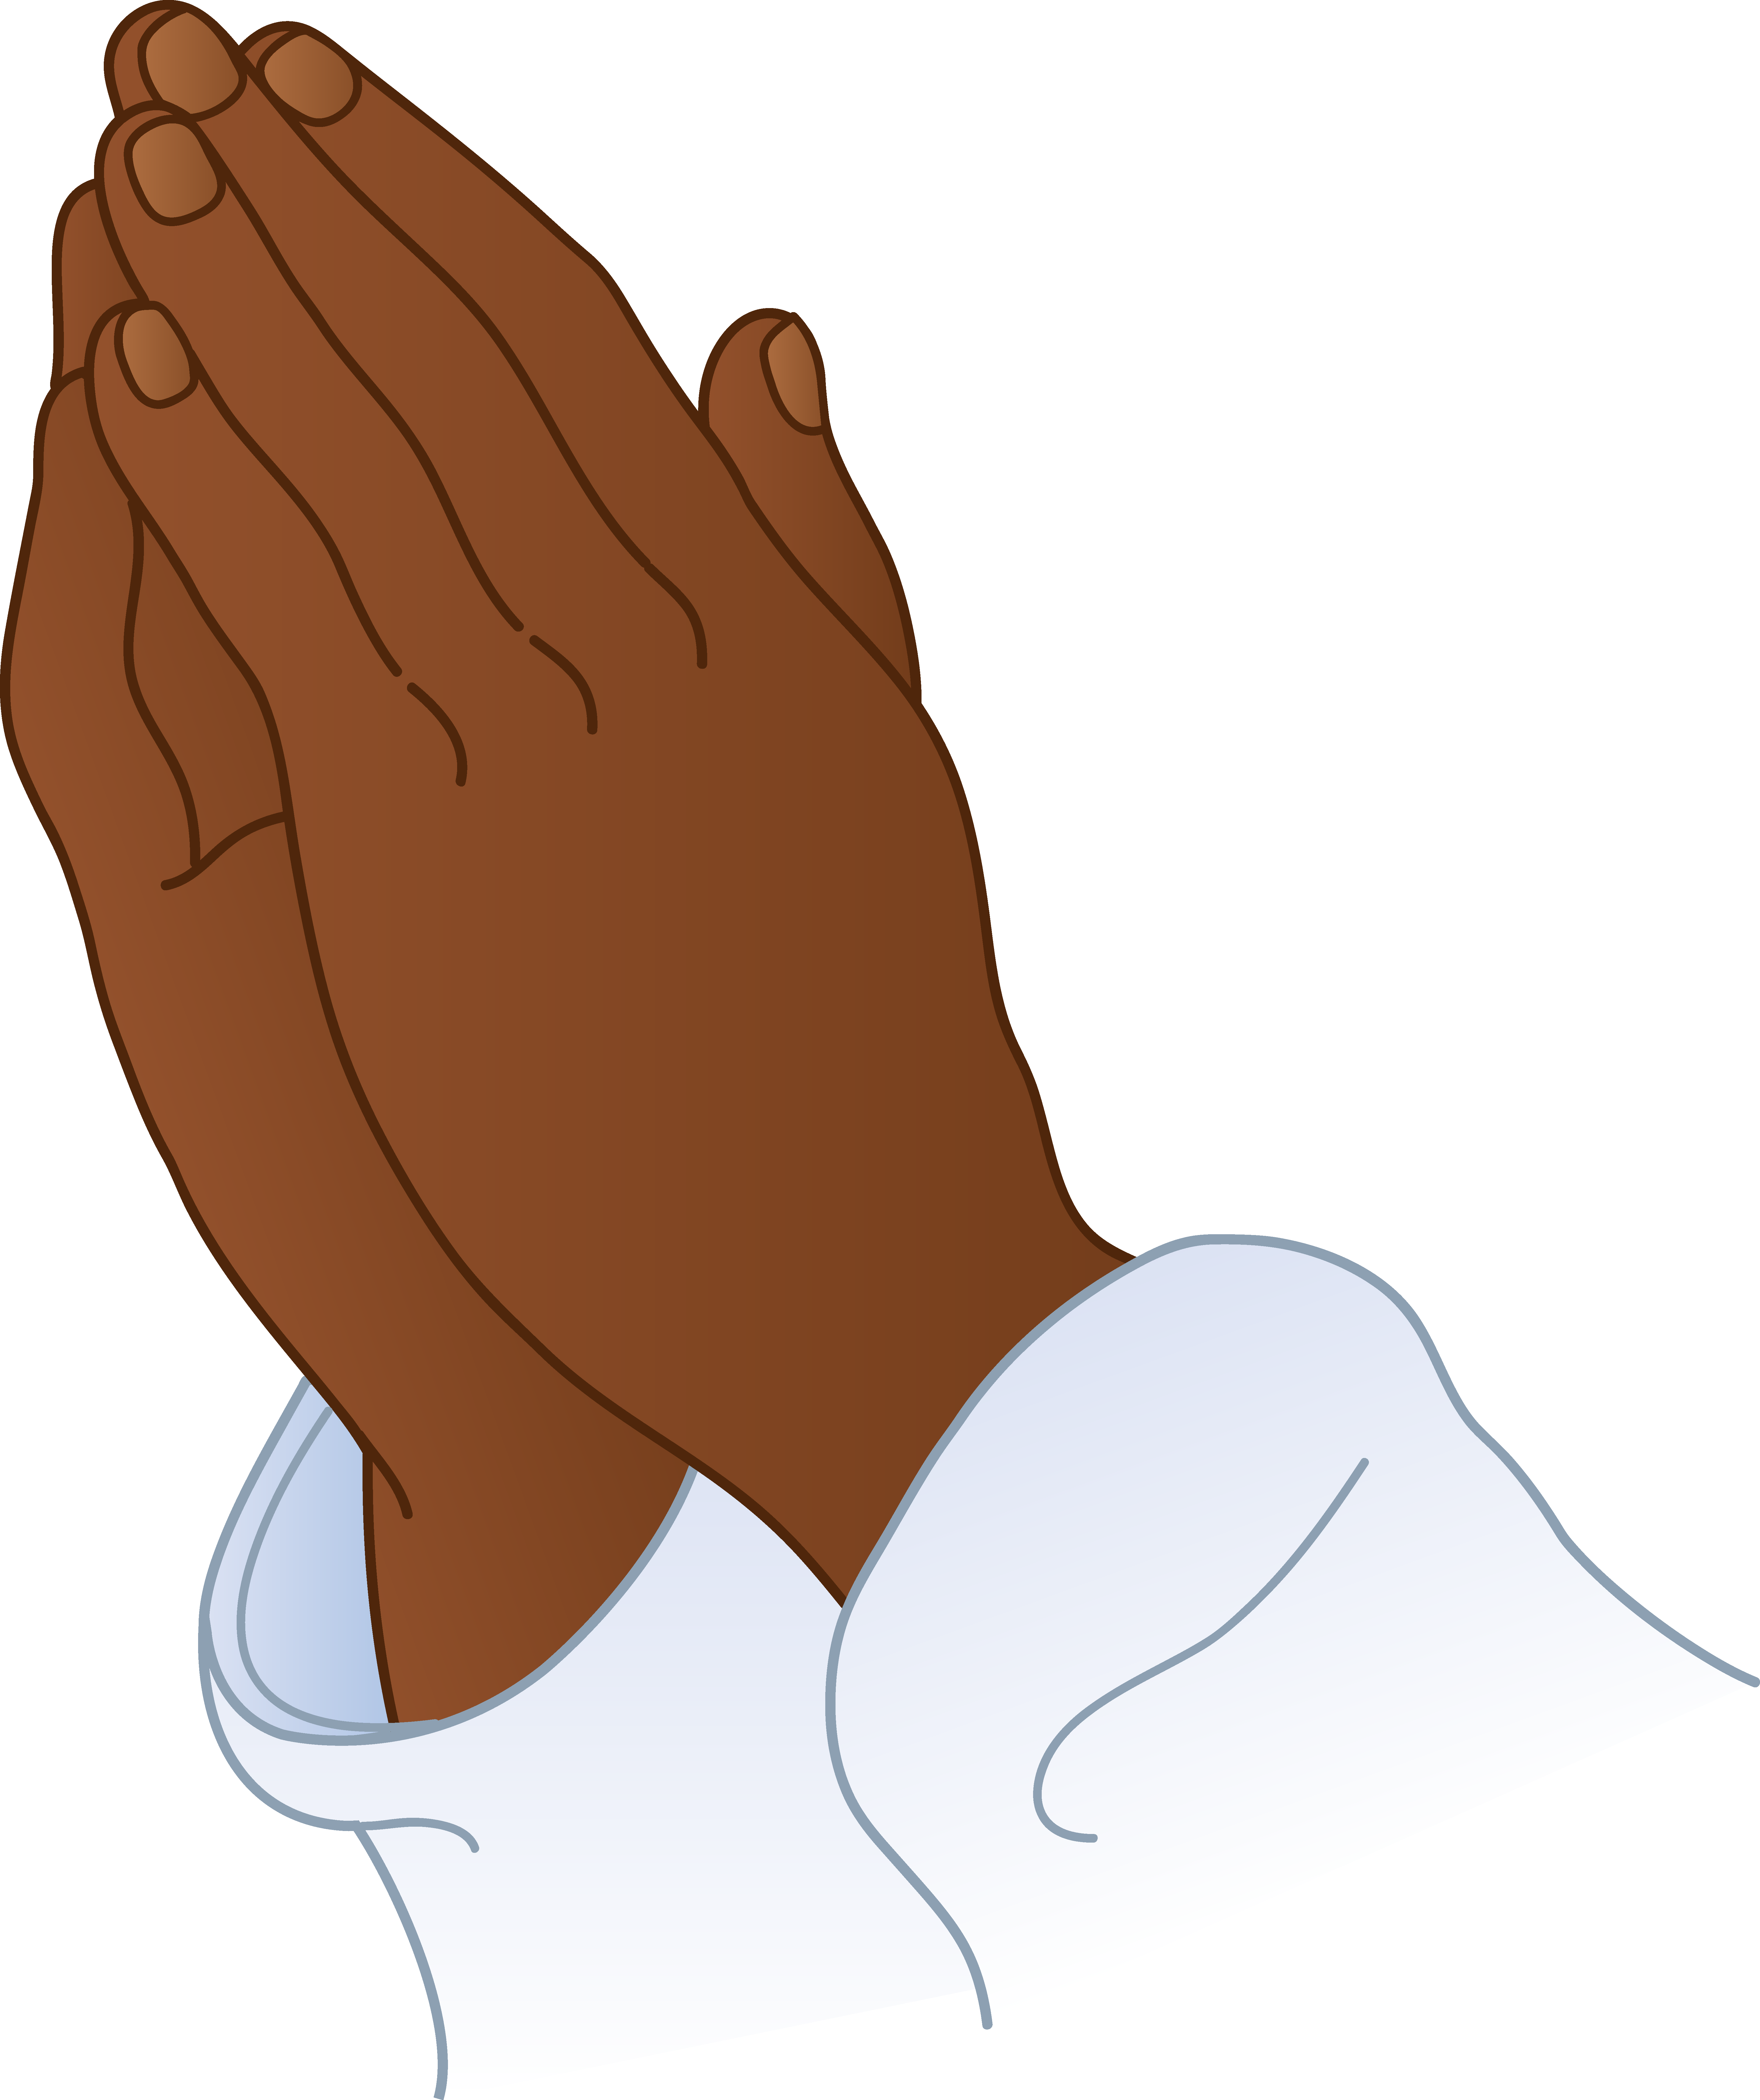 Hands Praying Clipart Download Free PNG